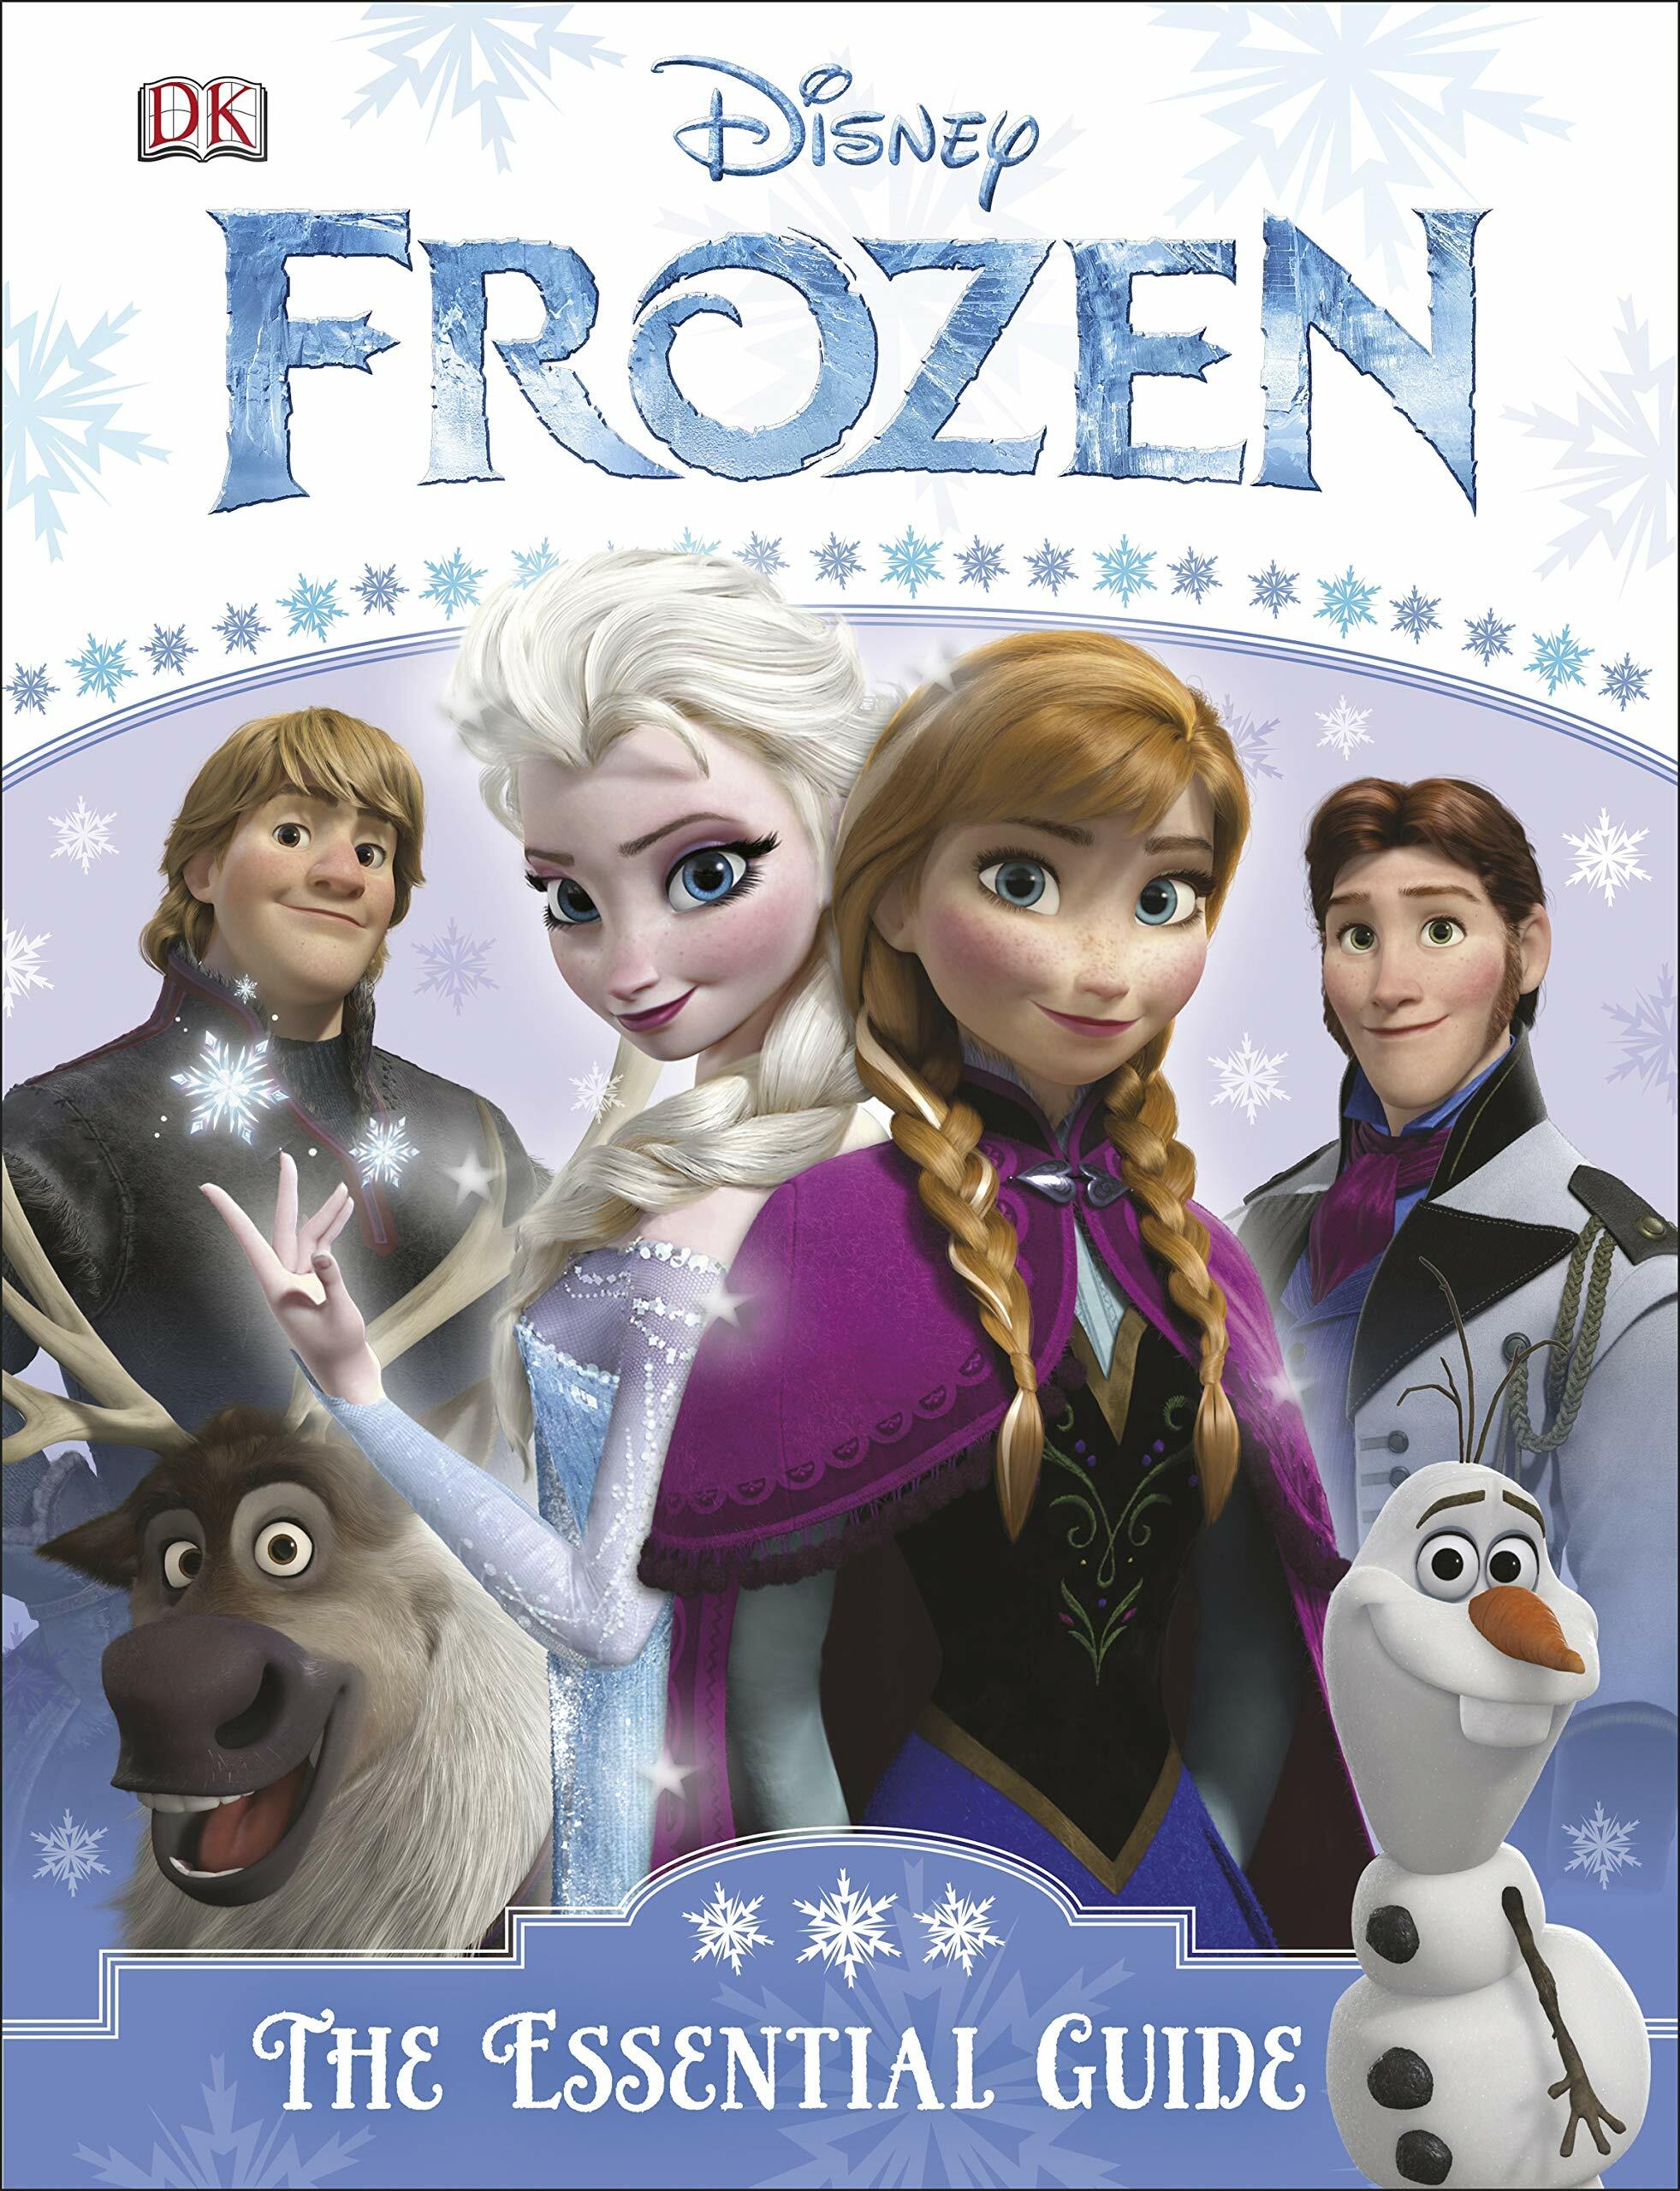 Disney Frozen: The Essential Guide (Hardcover)